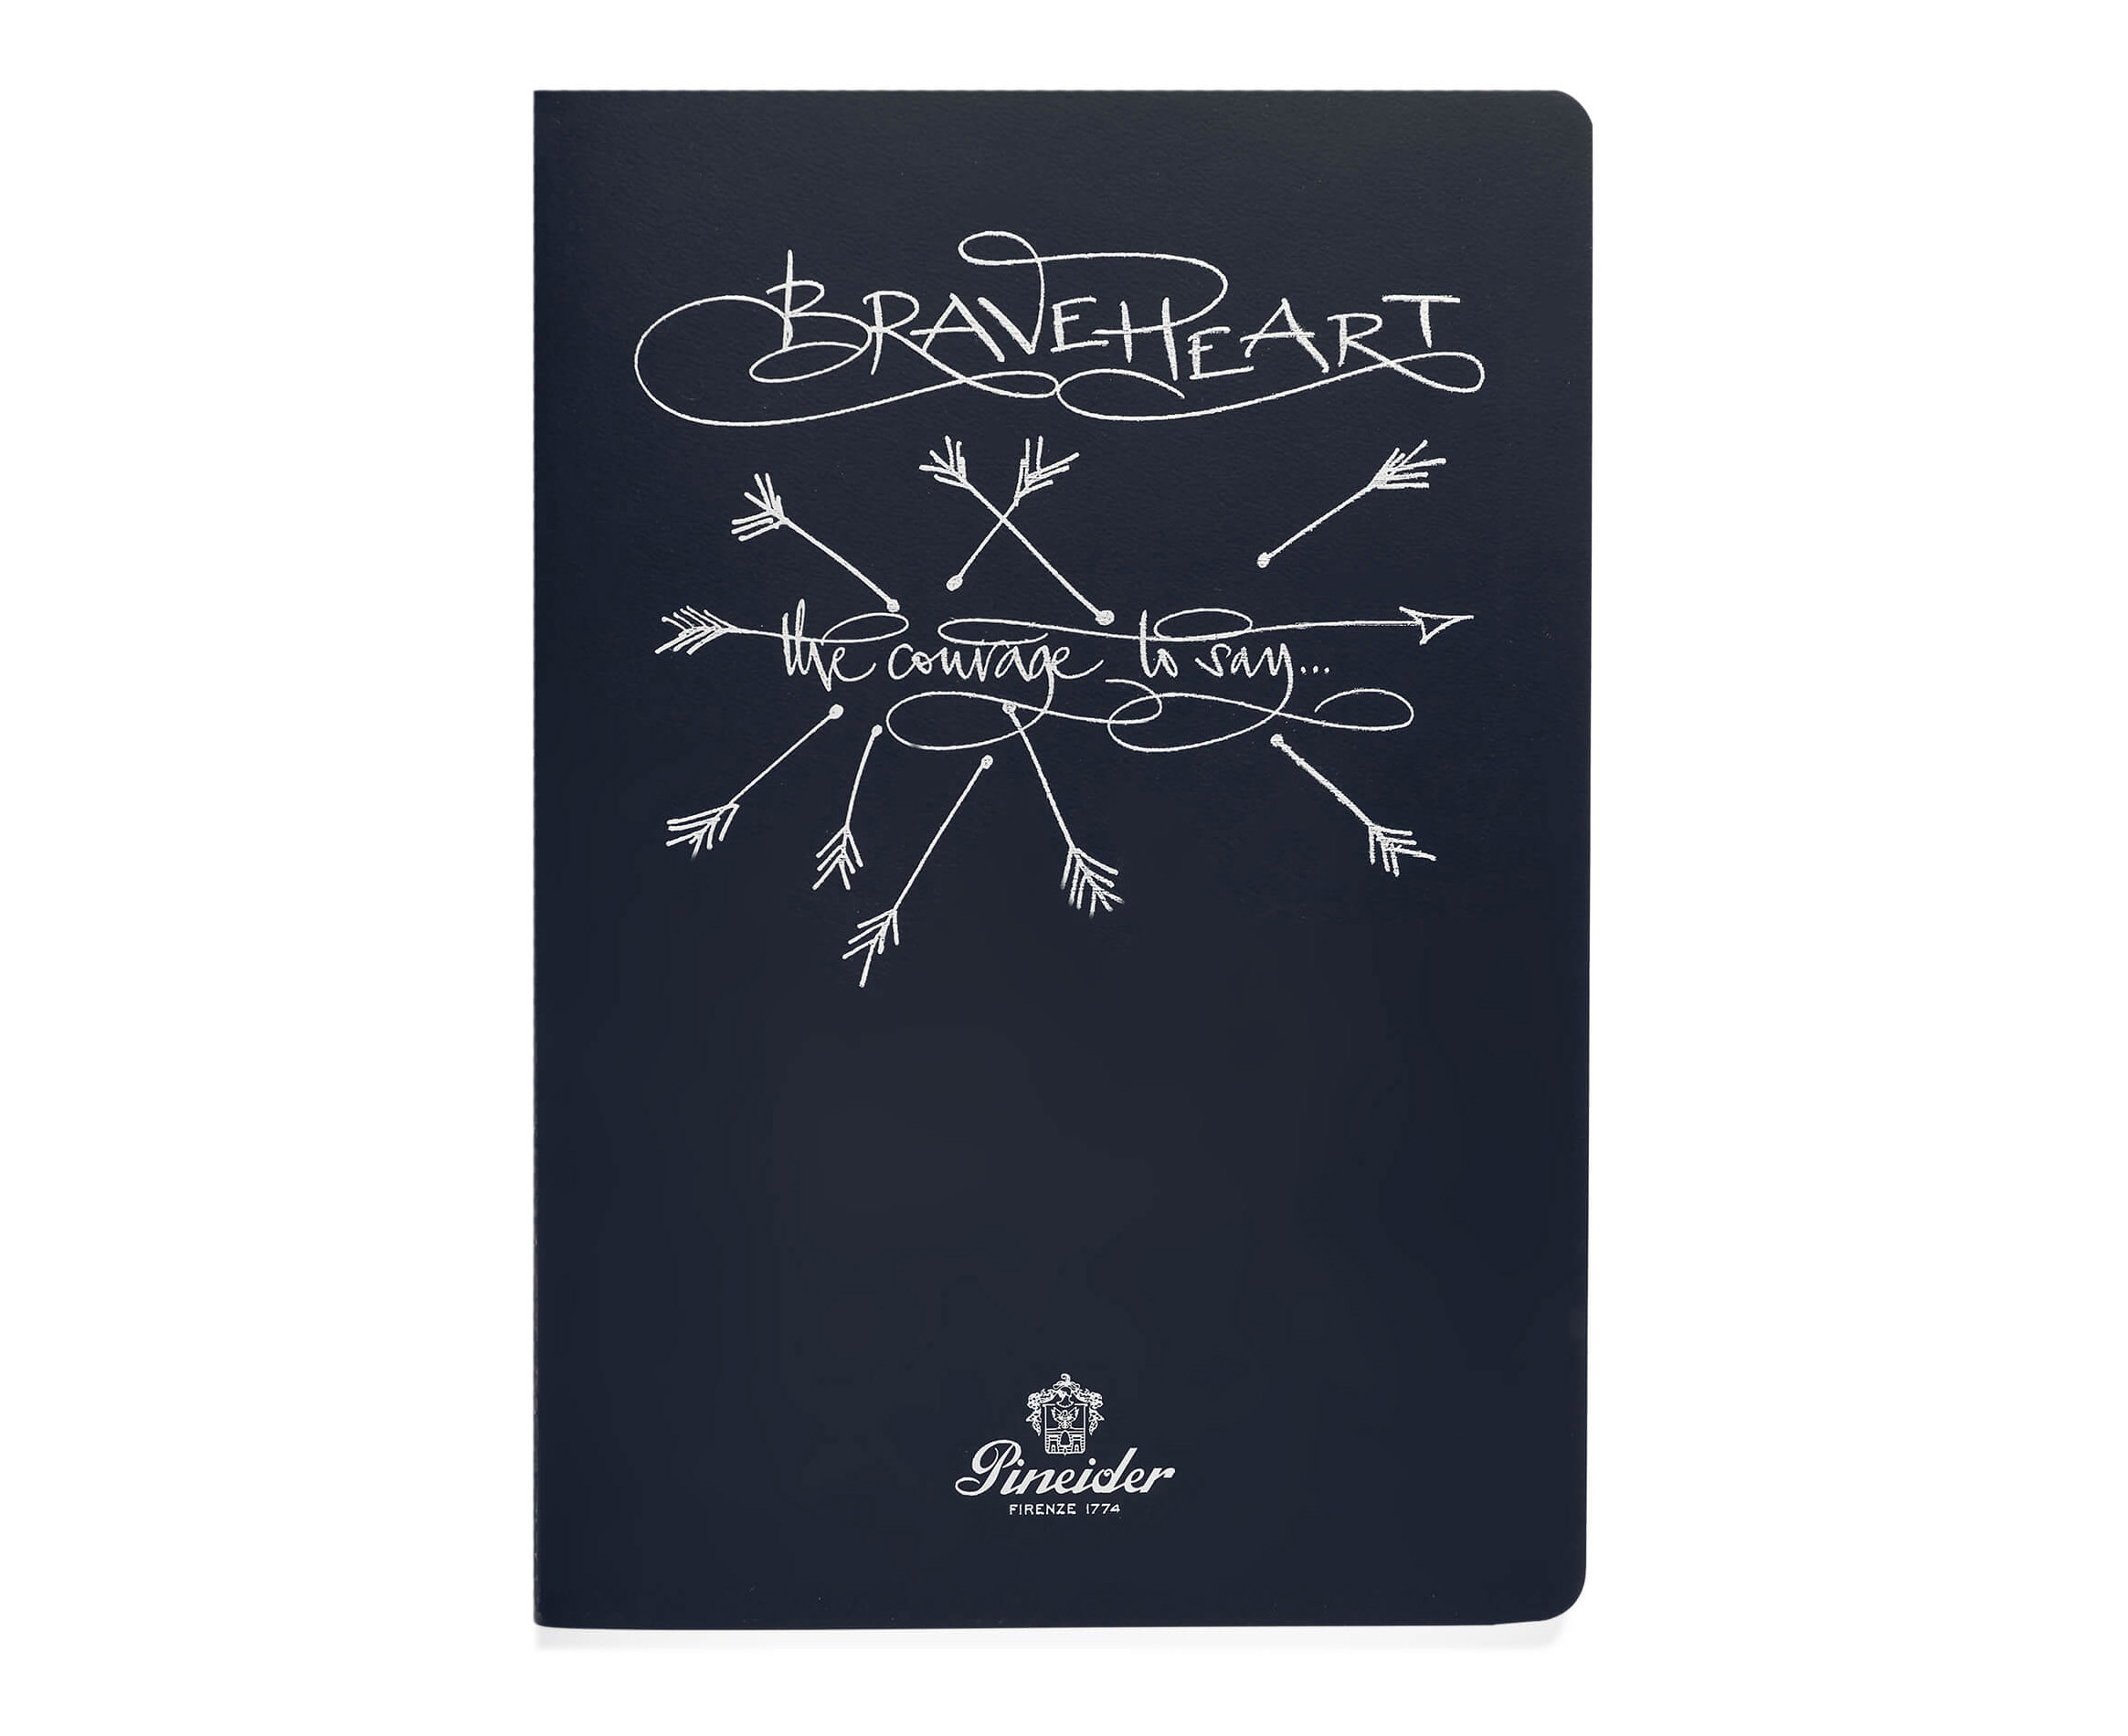 Braveheart Notebook by Betty Soldi - The courage to say